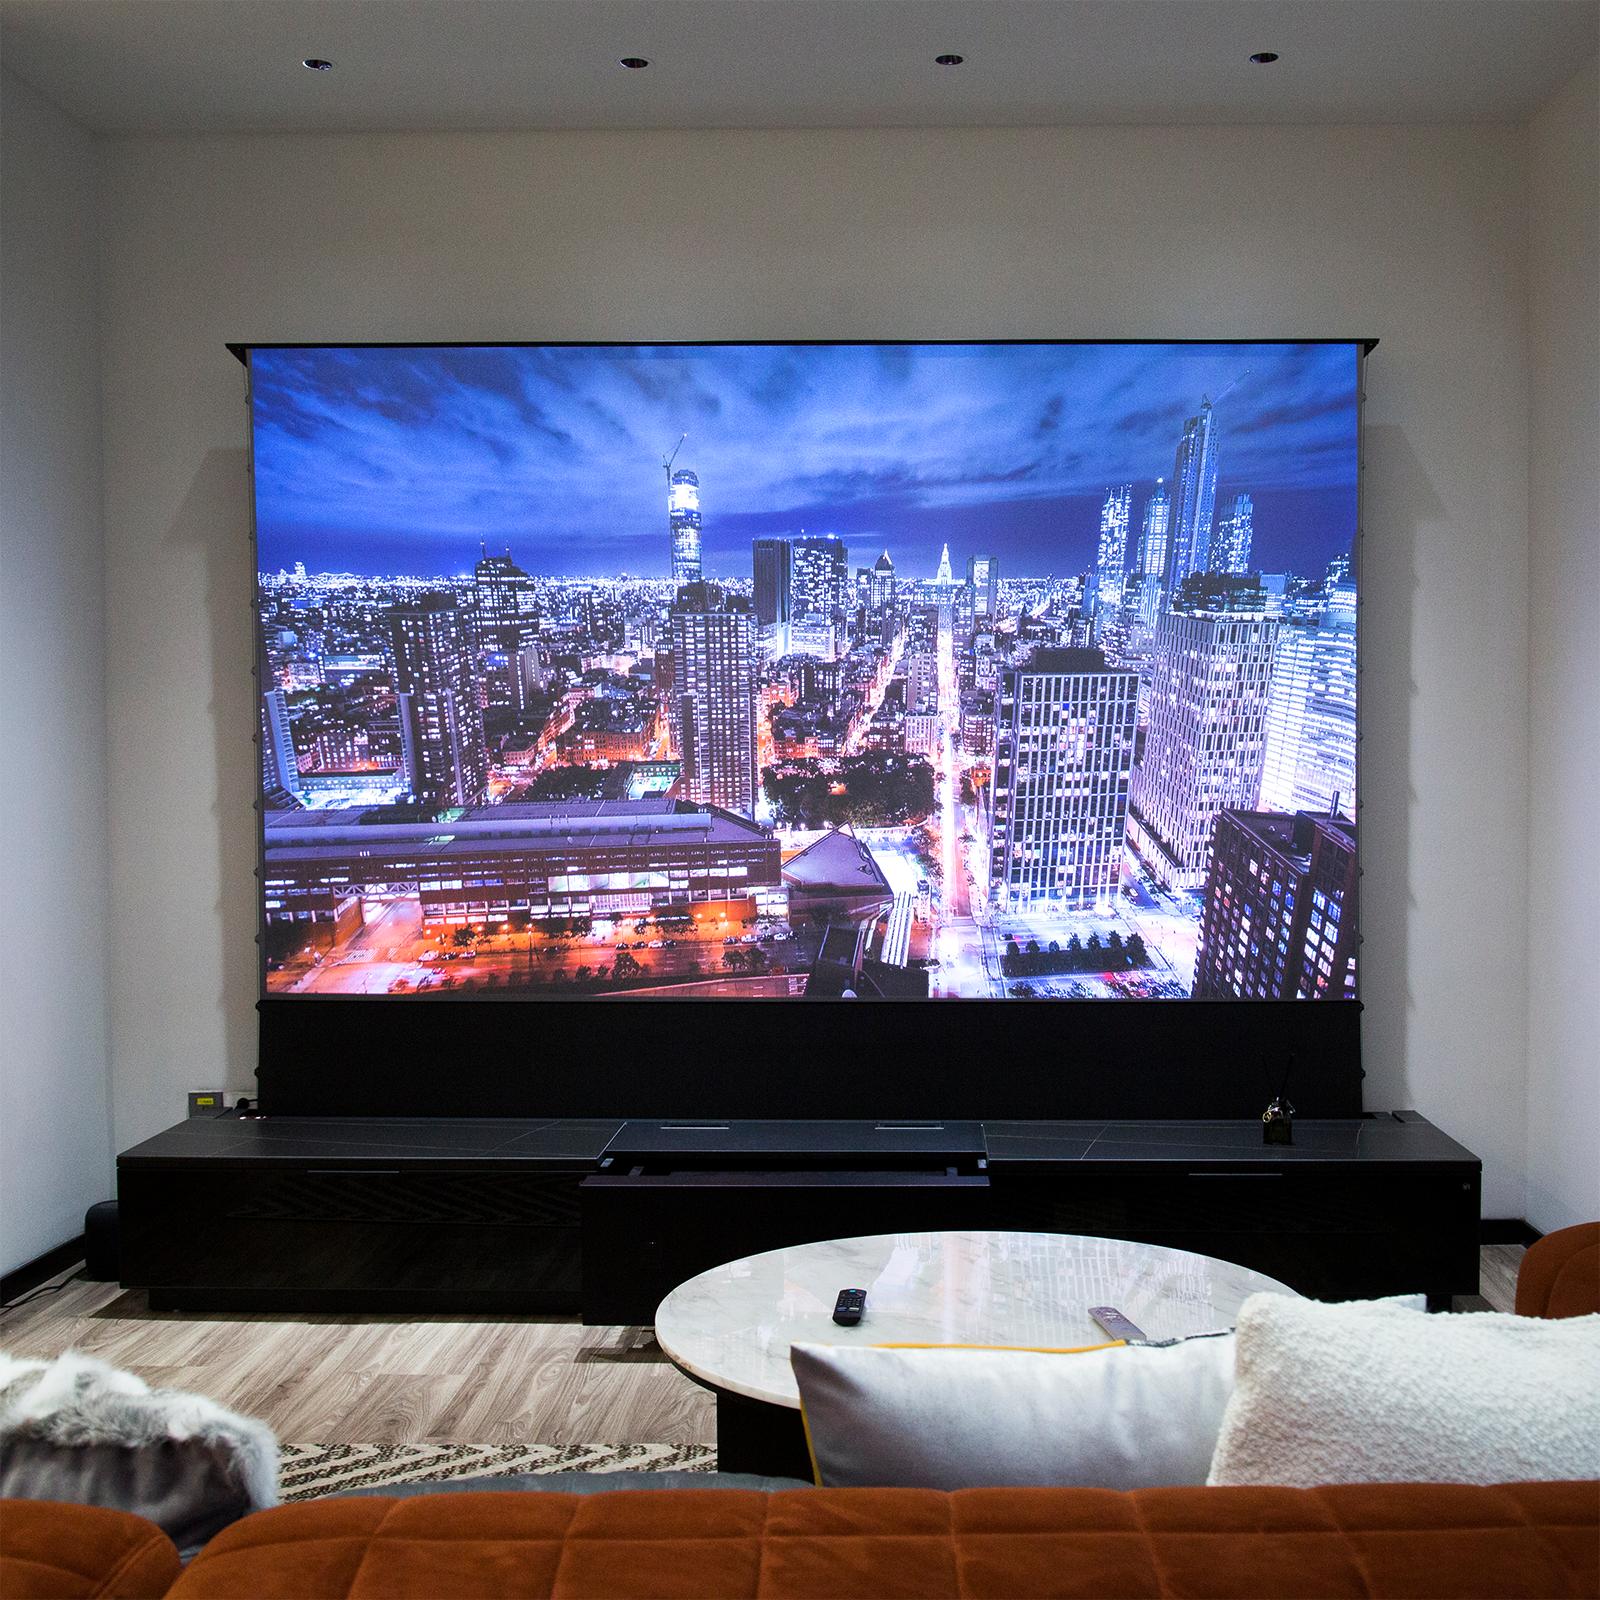 Luxurious living room featuring AWOL Vision LTV-3500 4k ust laser projector, motorized screen, and smart cabinetry displaying vibrant cityscapes for a cinematic experience.